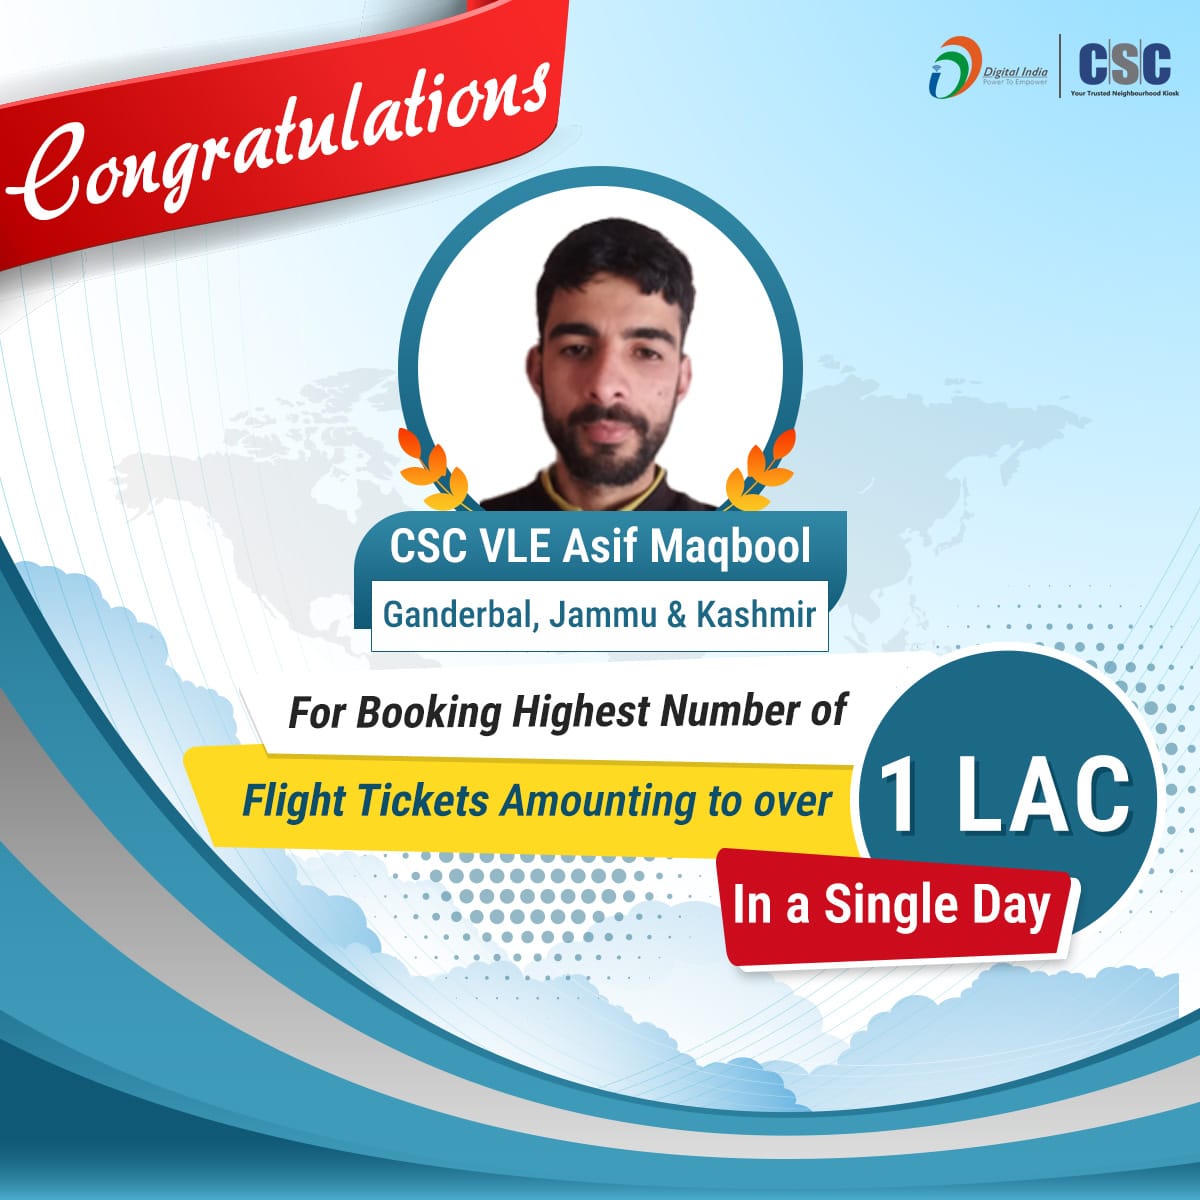 Hats off to VLE Asif Maqbool from Ganderbal! He just booked over 1 Lakh rupees worth of flight tickets in just one day!